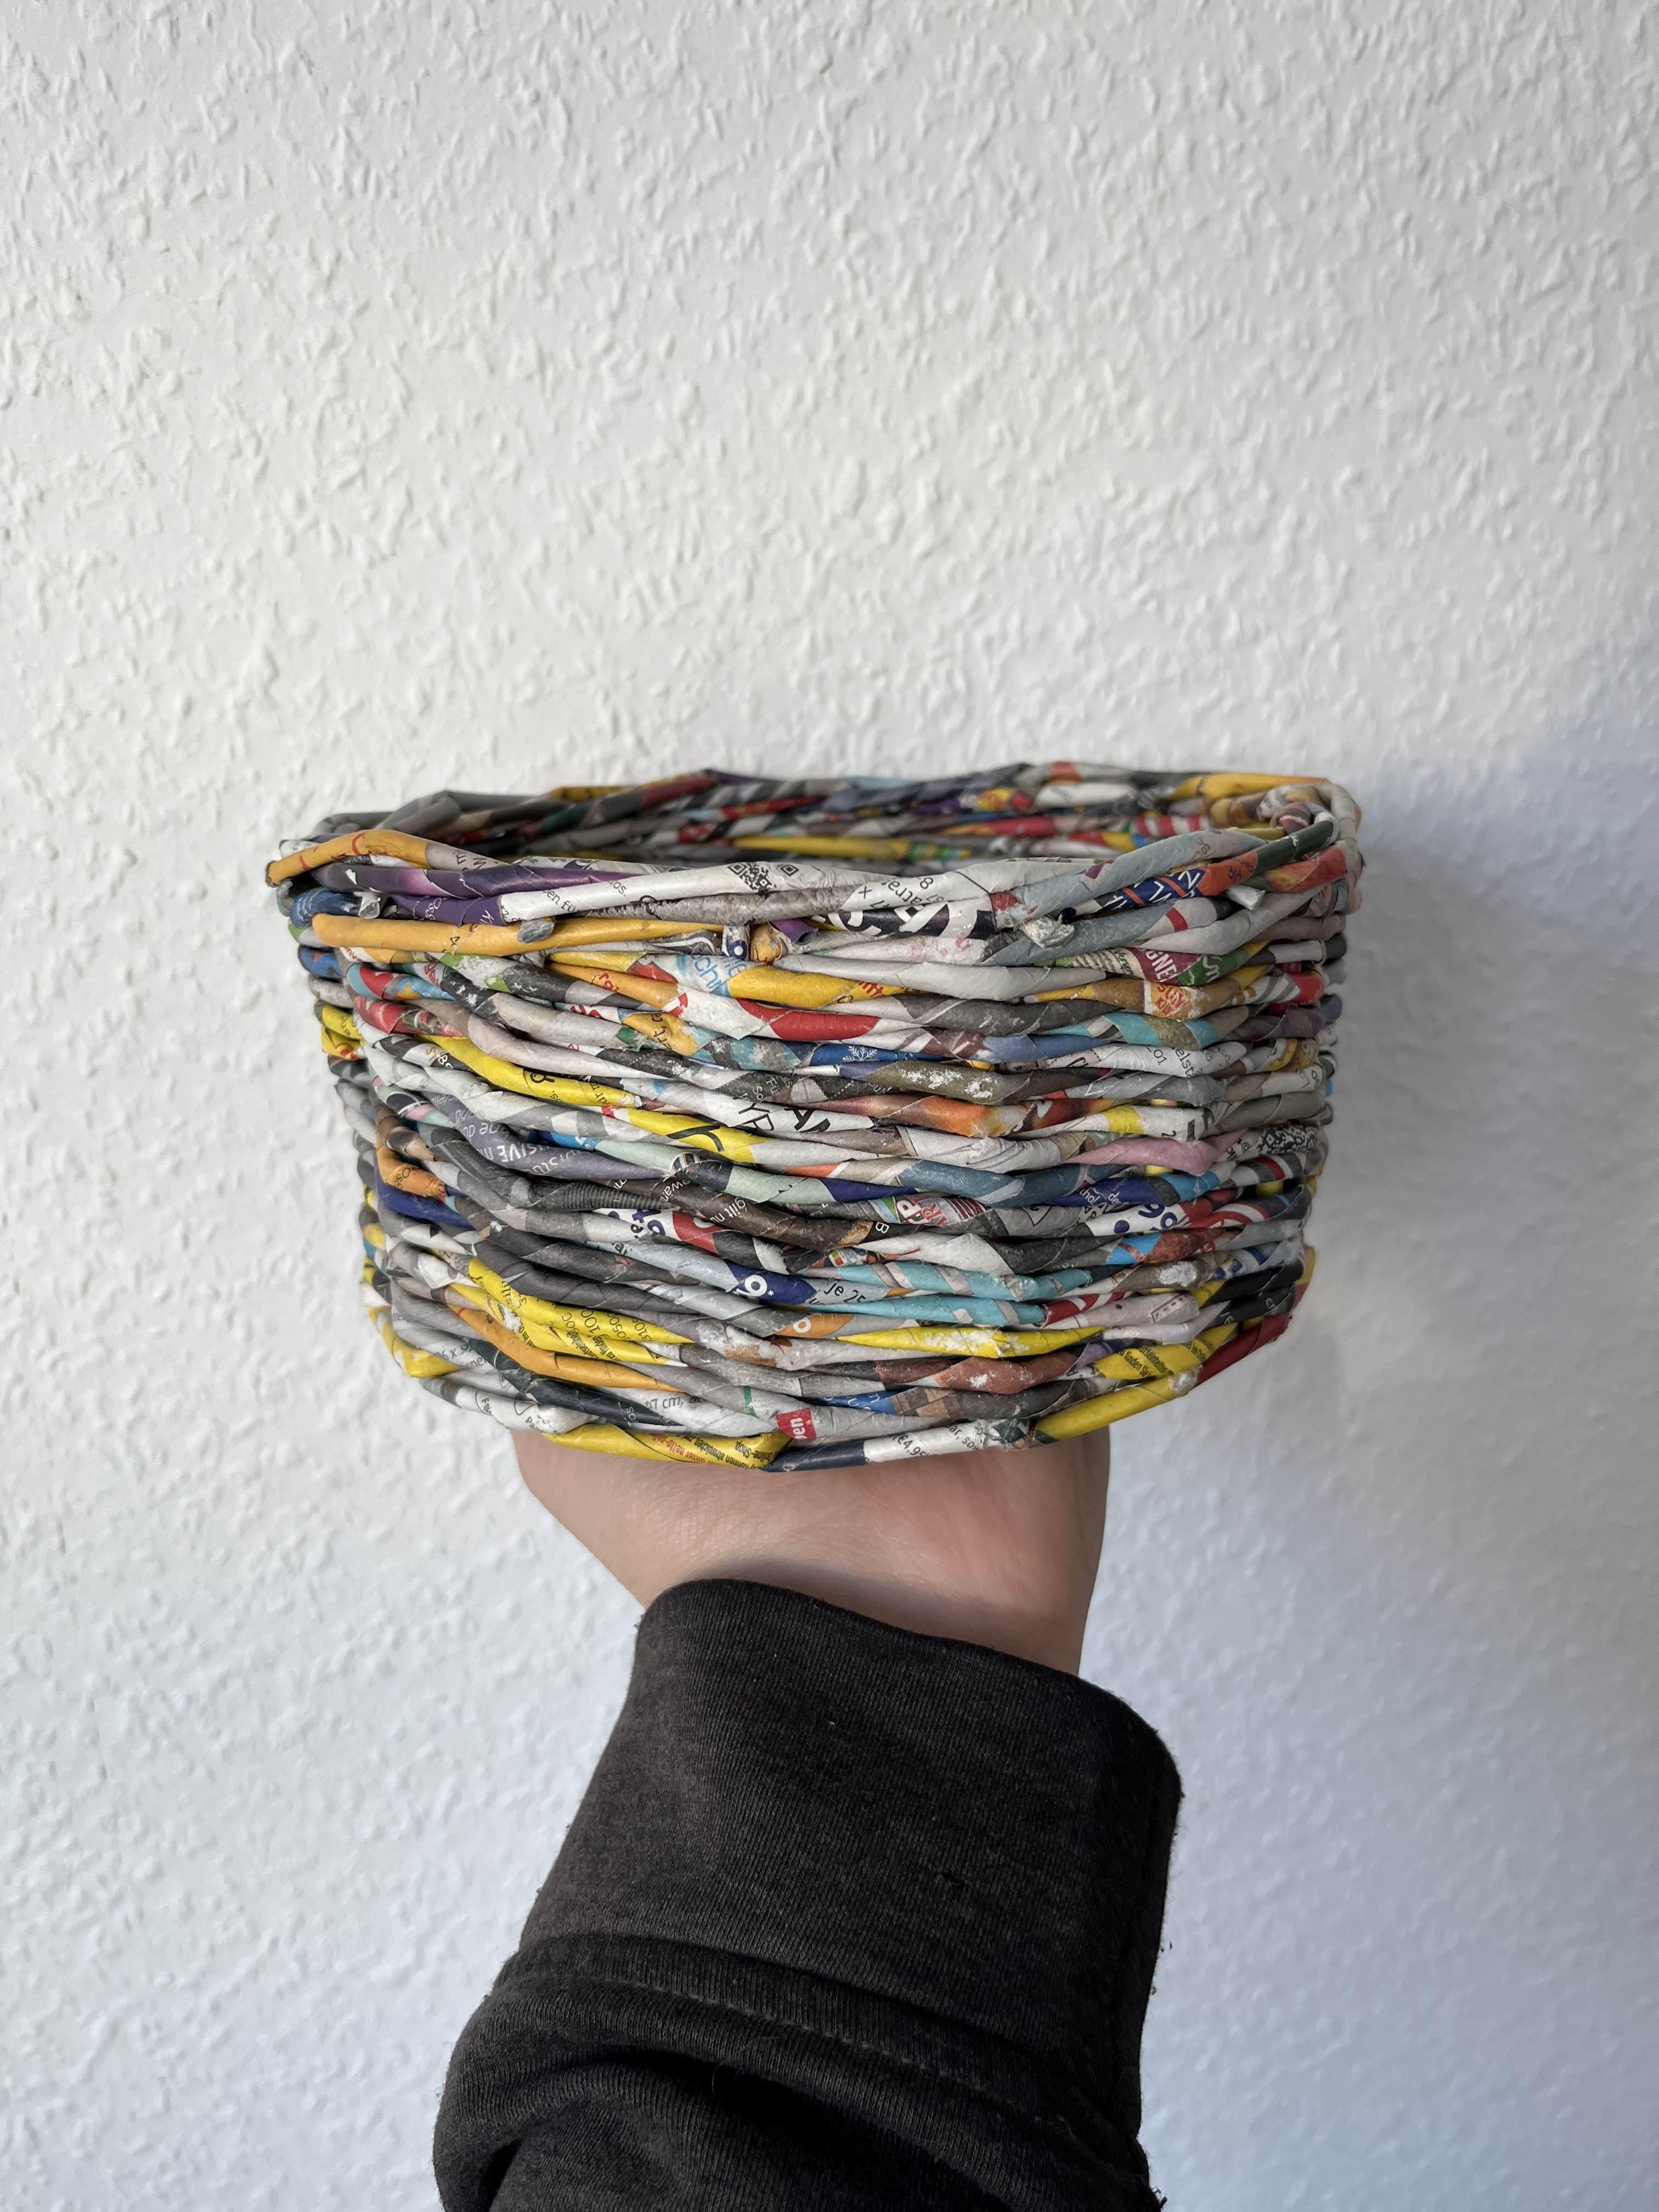 Instructables_sun_recycled-newspaper-basket (46).jpg